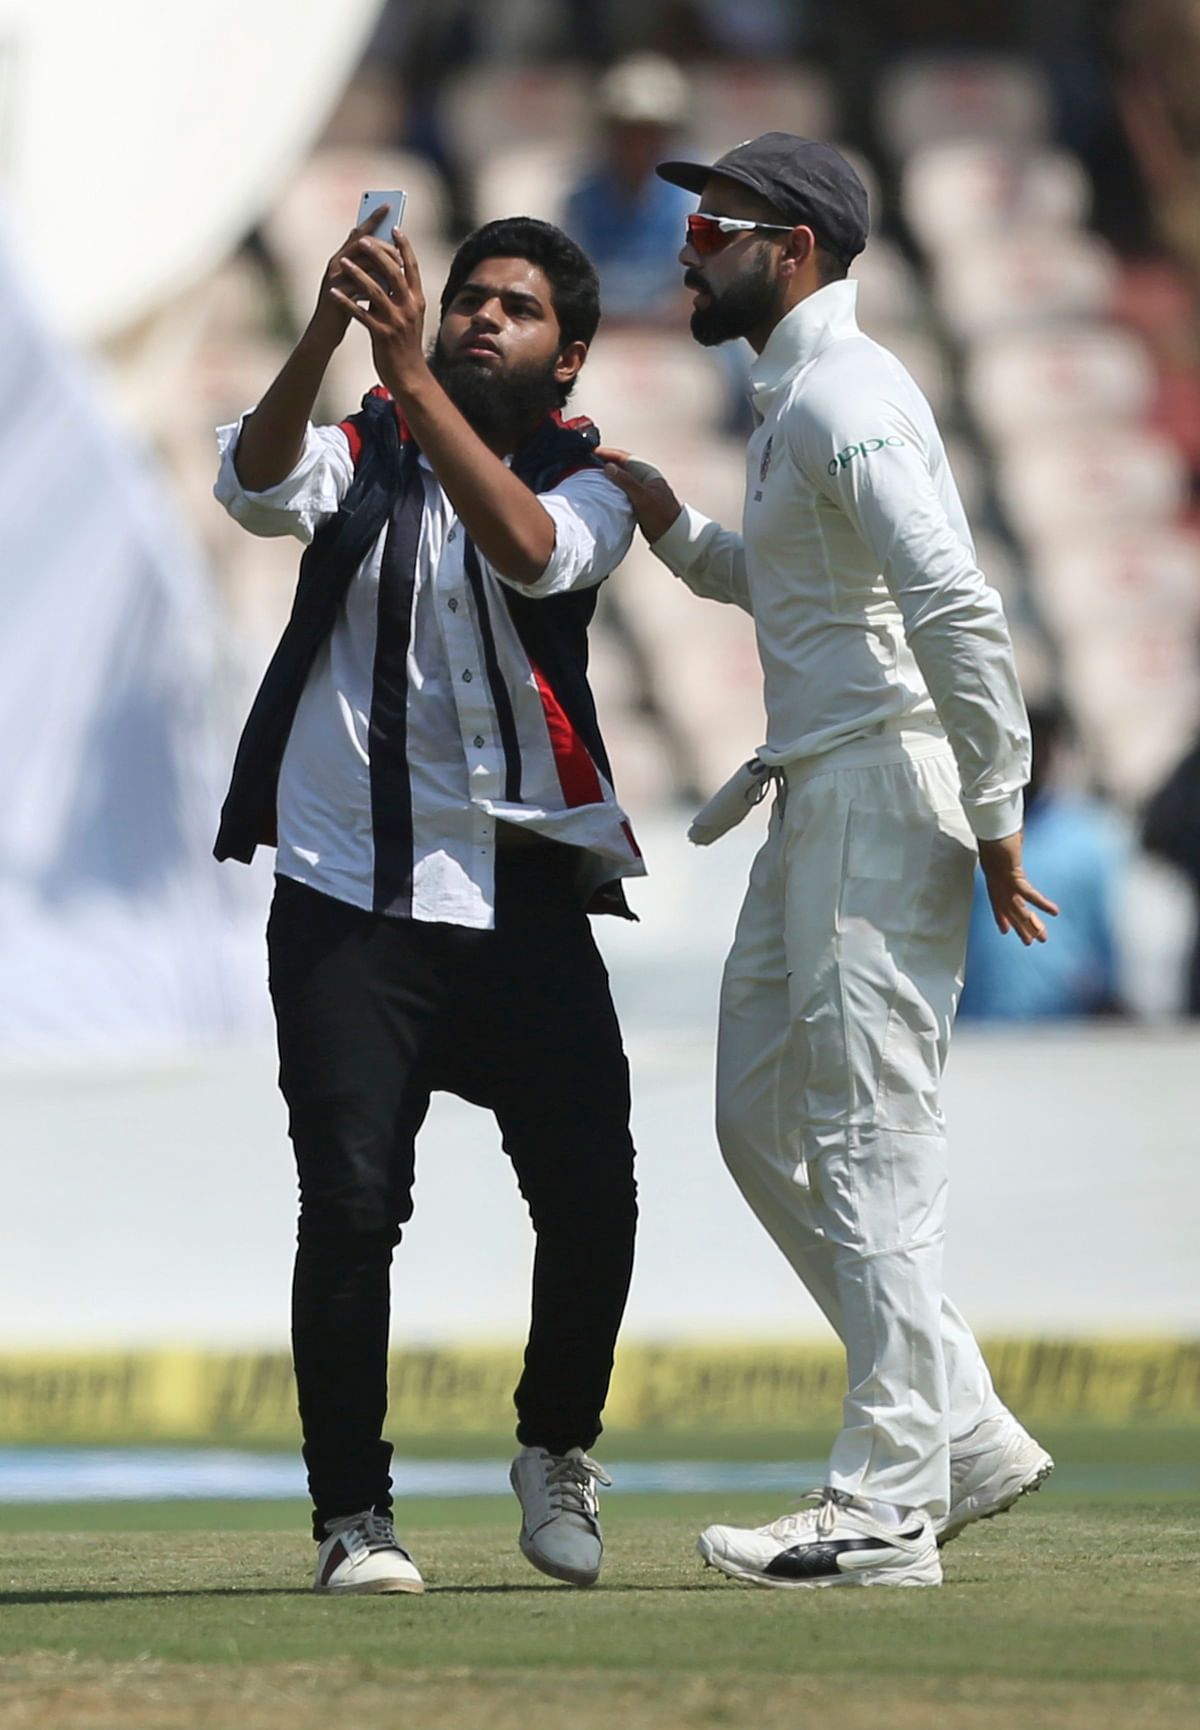 Fans breaching security cordon to get up close with Virat Kohli is becoming a new norm.